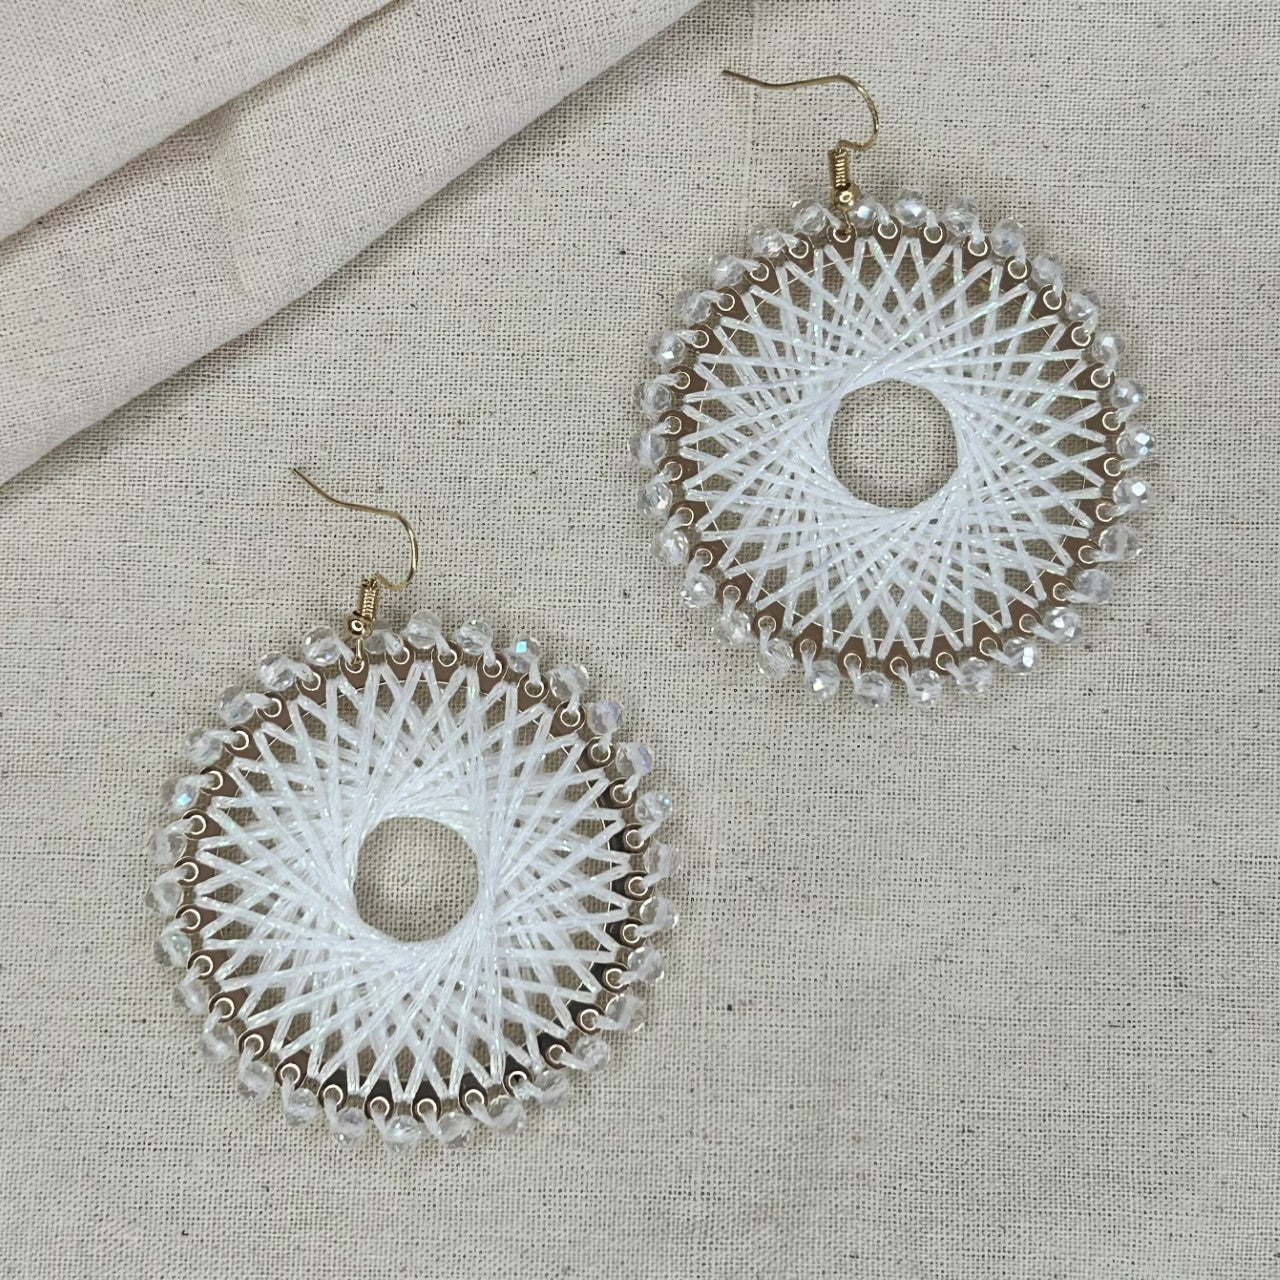 Angelco Accessories Colour burst circle earrings on linen background - white